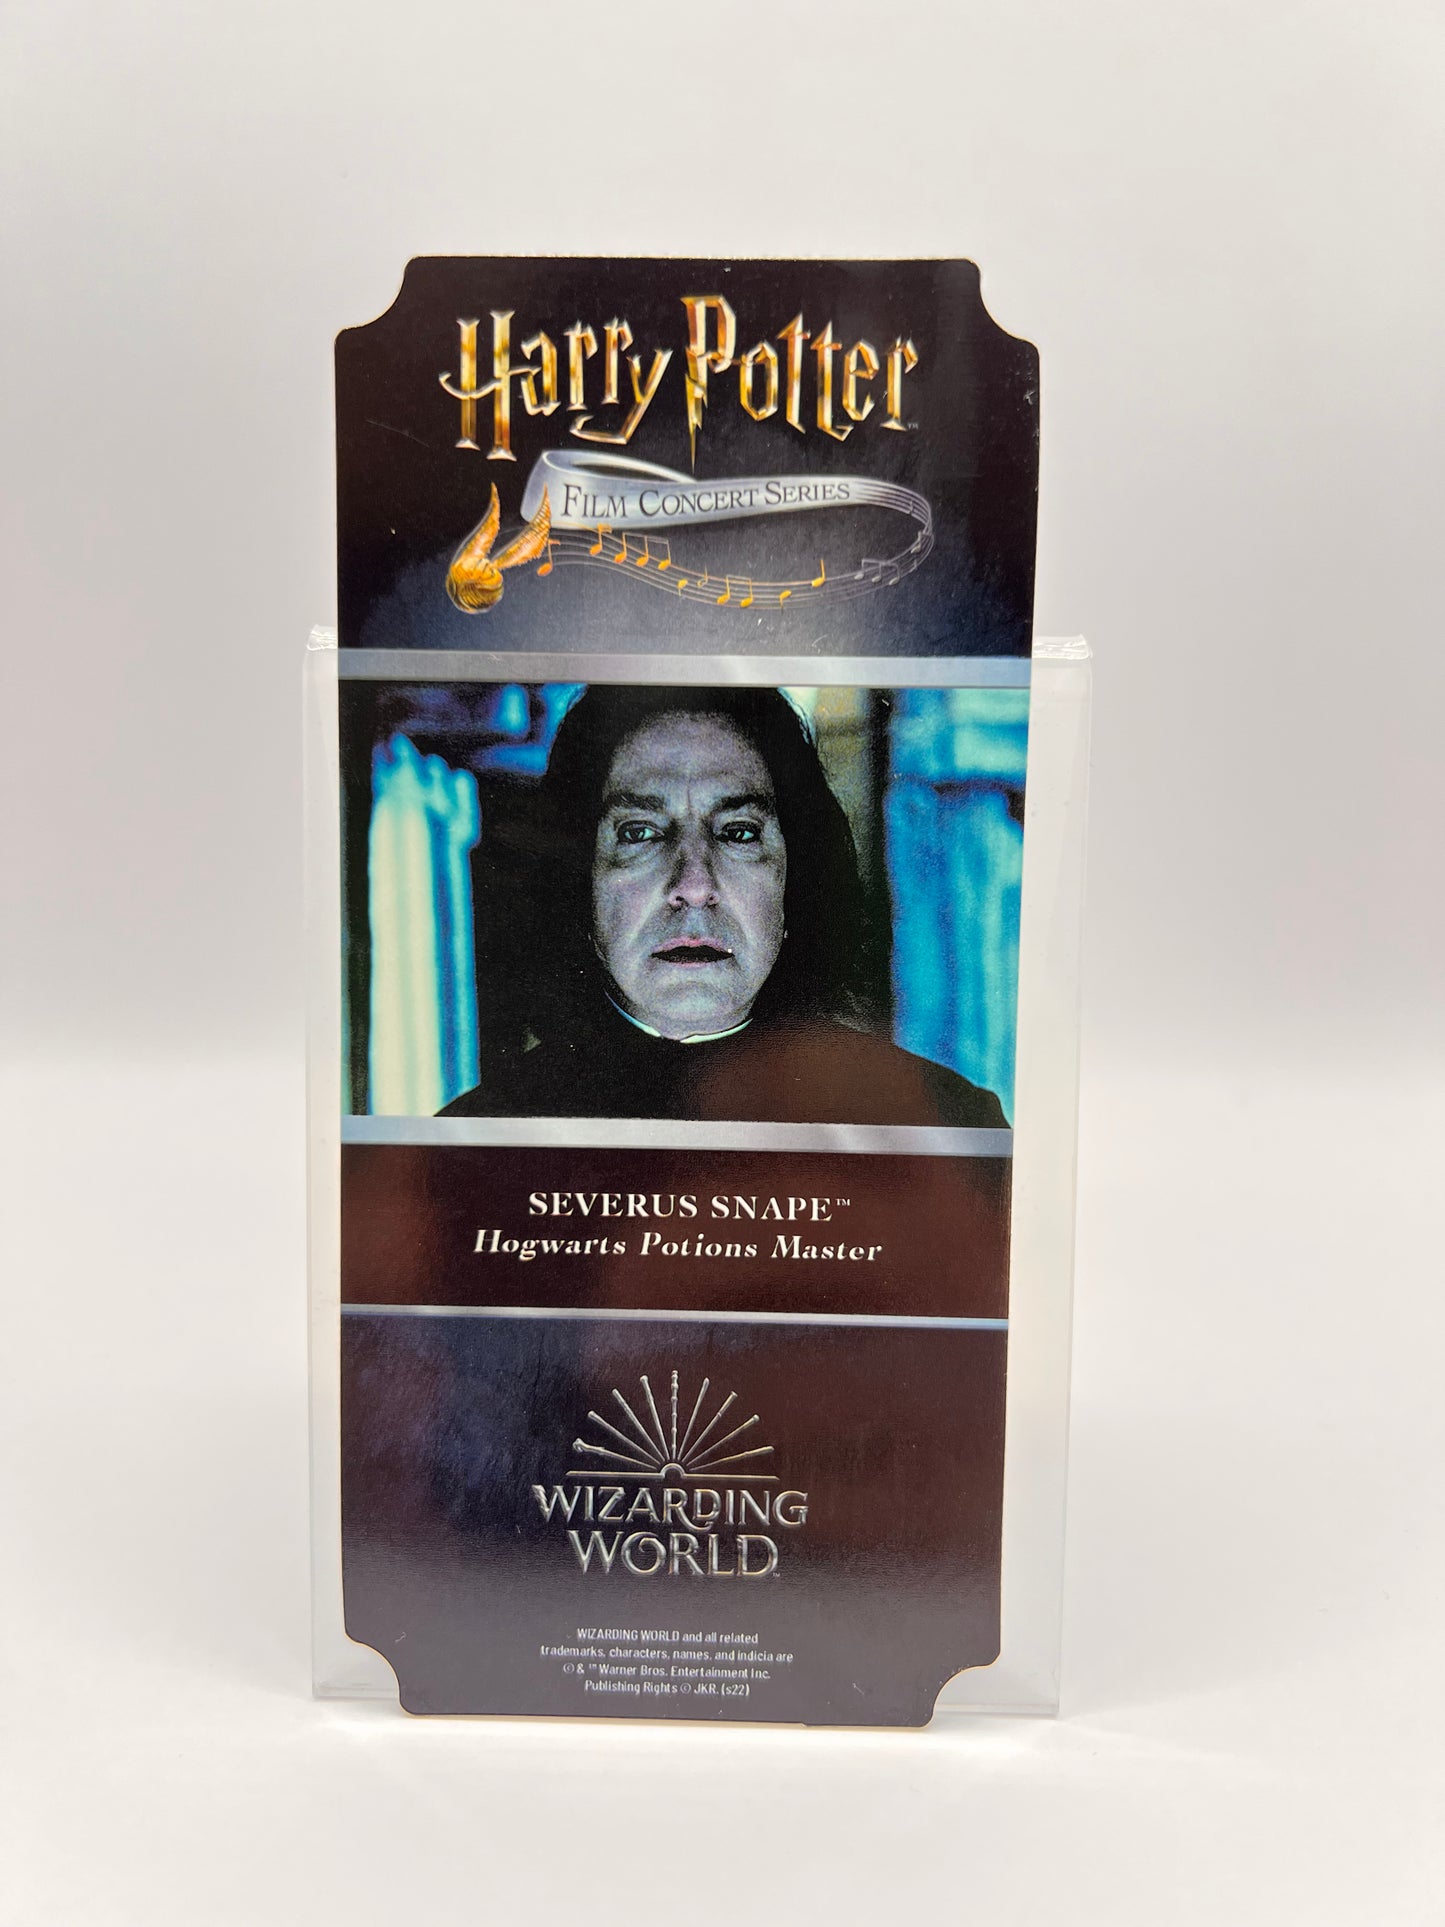 Harry Potter and the Deathly Hallows™ Part 2 in Concert Souvenir Ticket